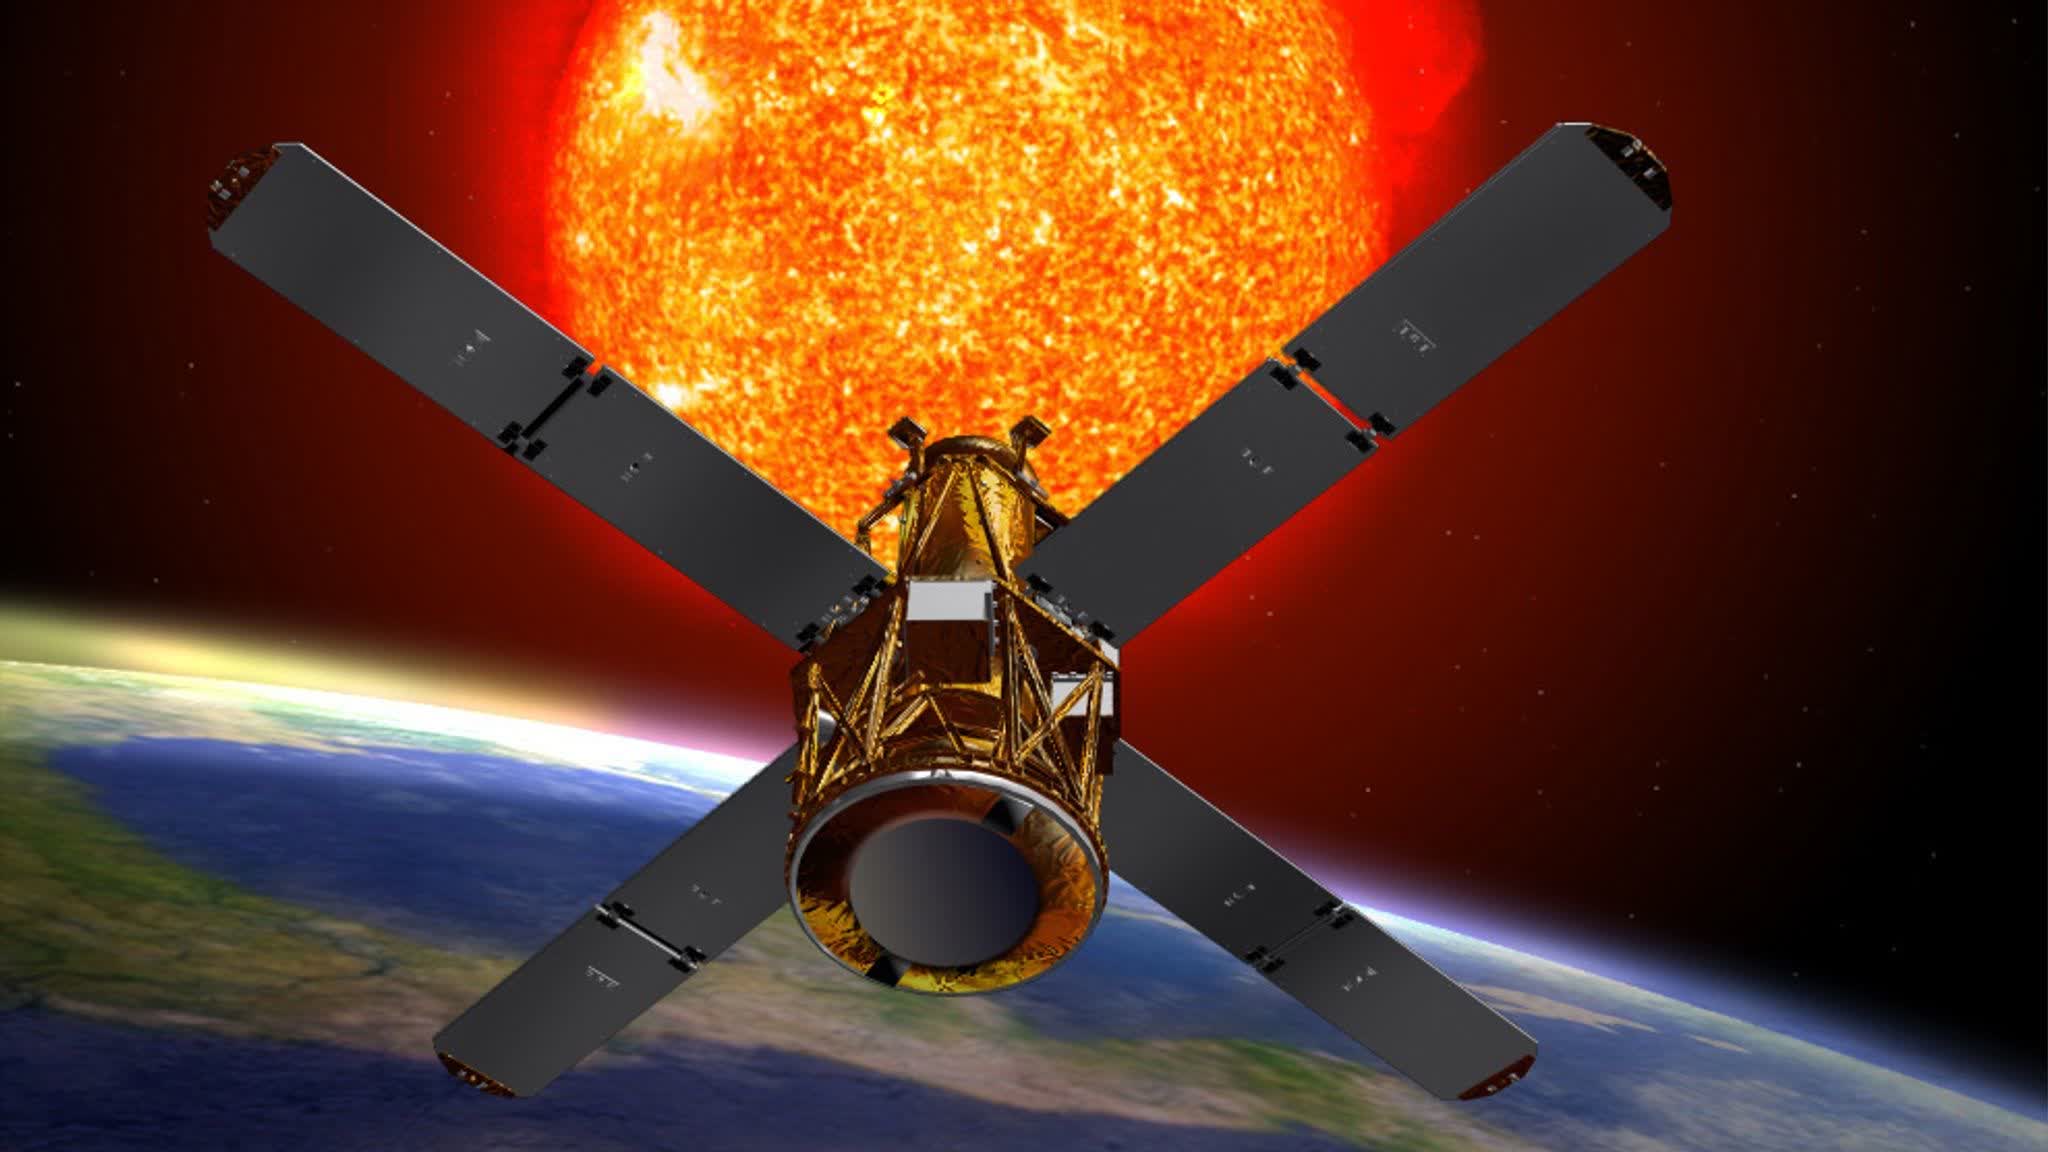 NASA expects retired solar satellite to make an uncontrolled deorbit within the next 22 hours